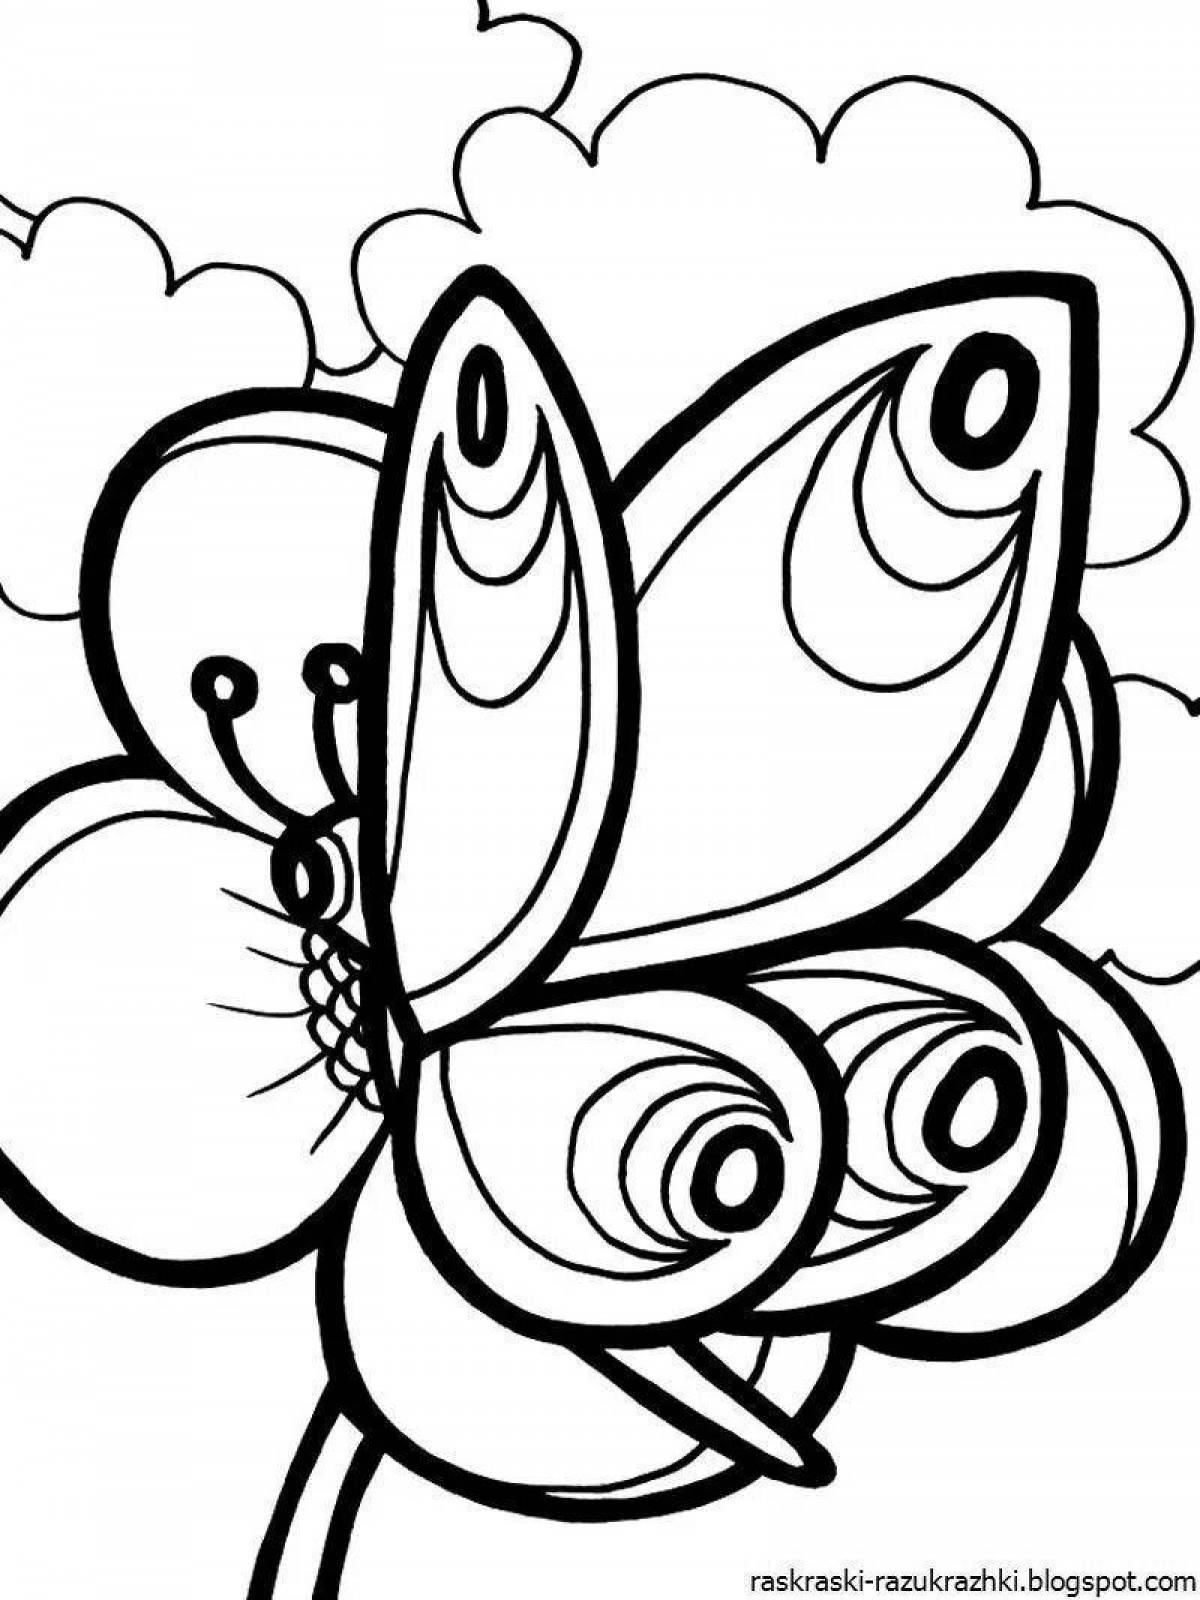 Playful butterfly with flower coloring book